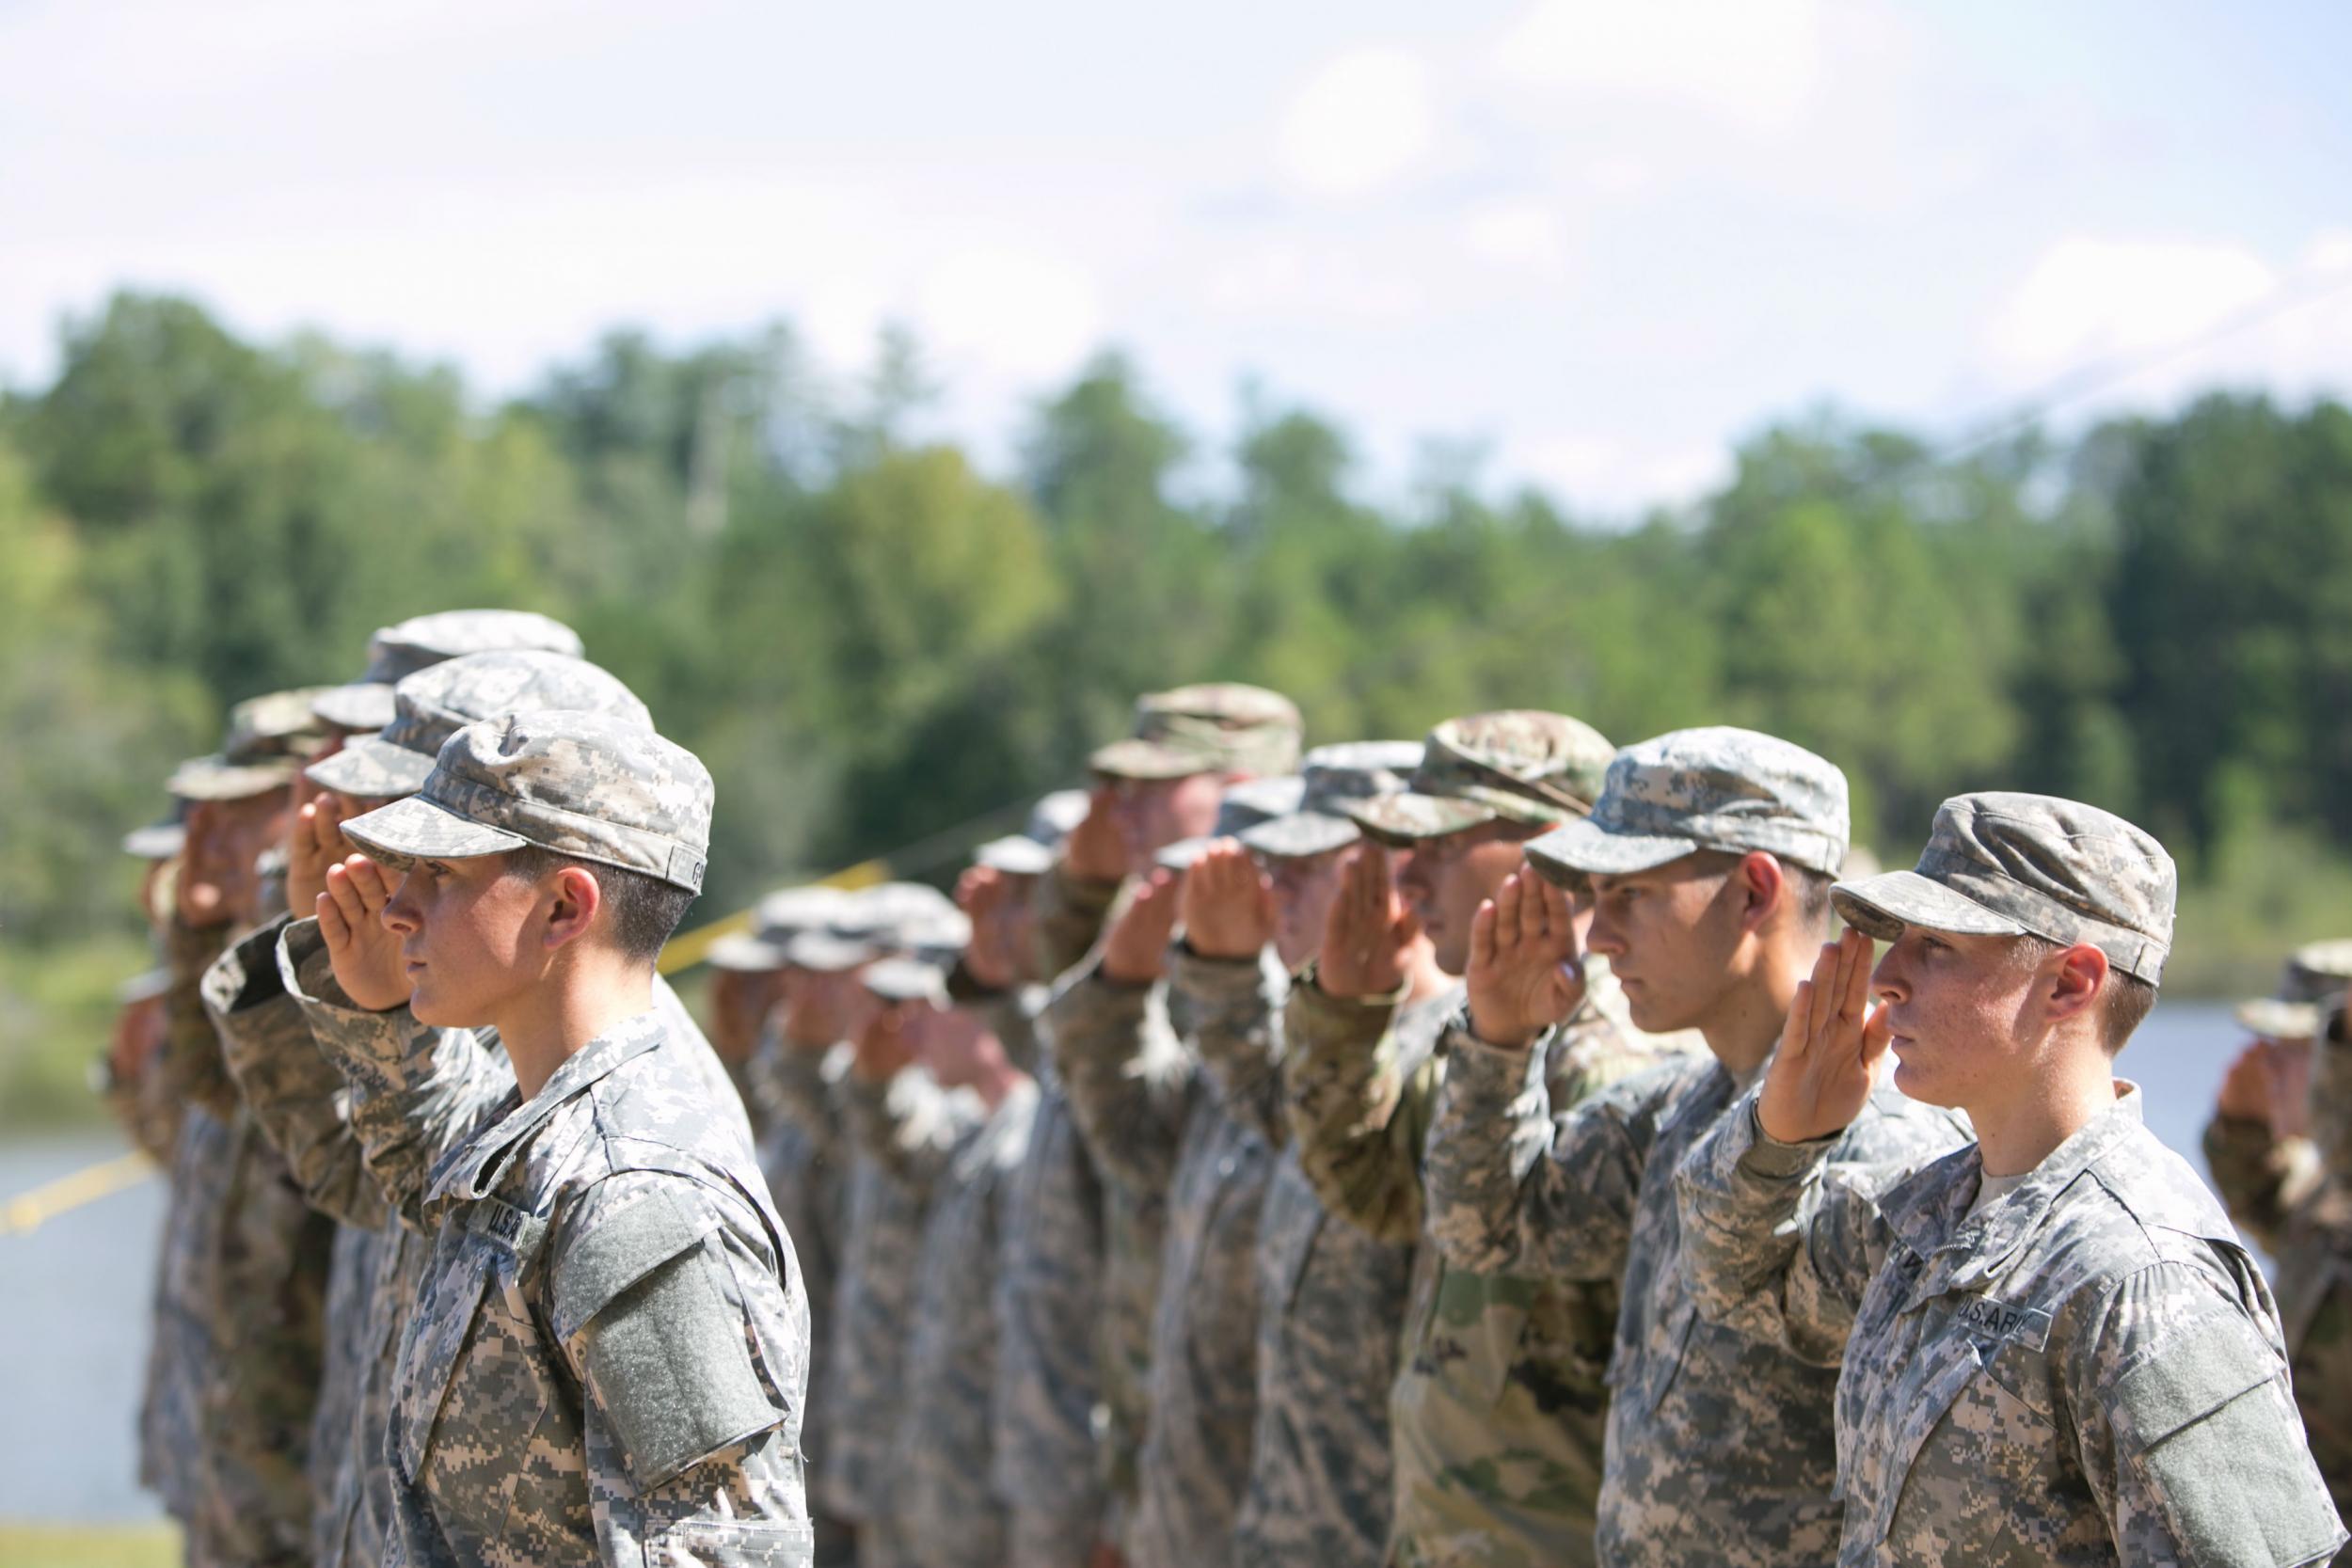 Two women graduate from the US Army Rangers training